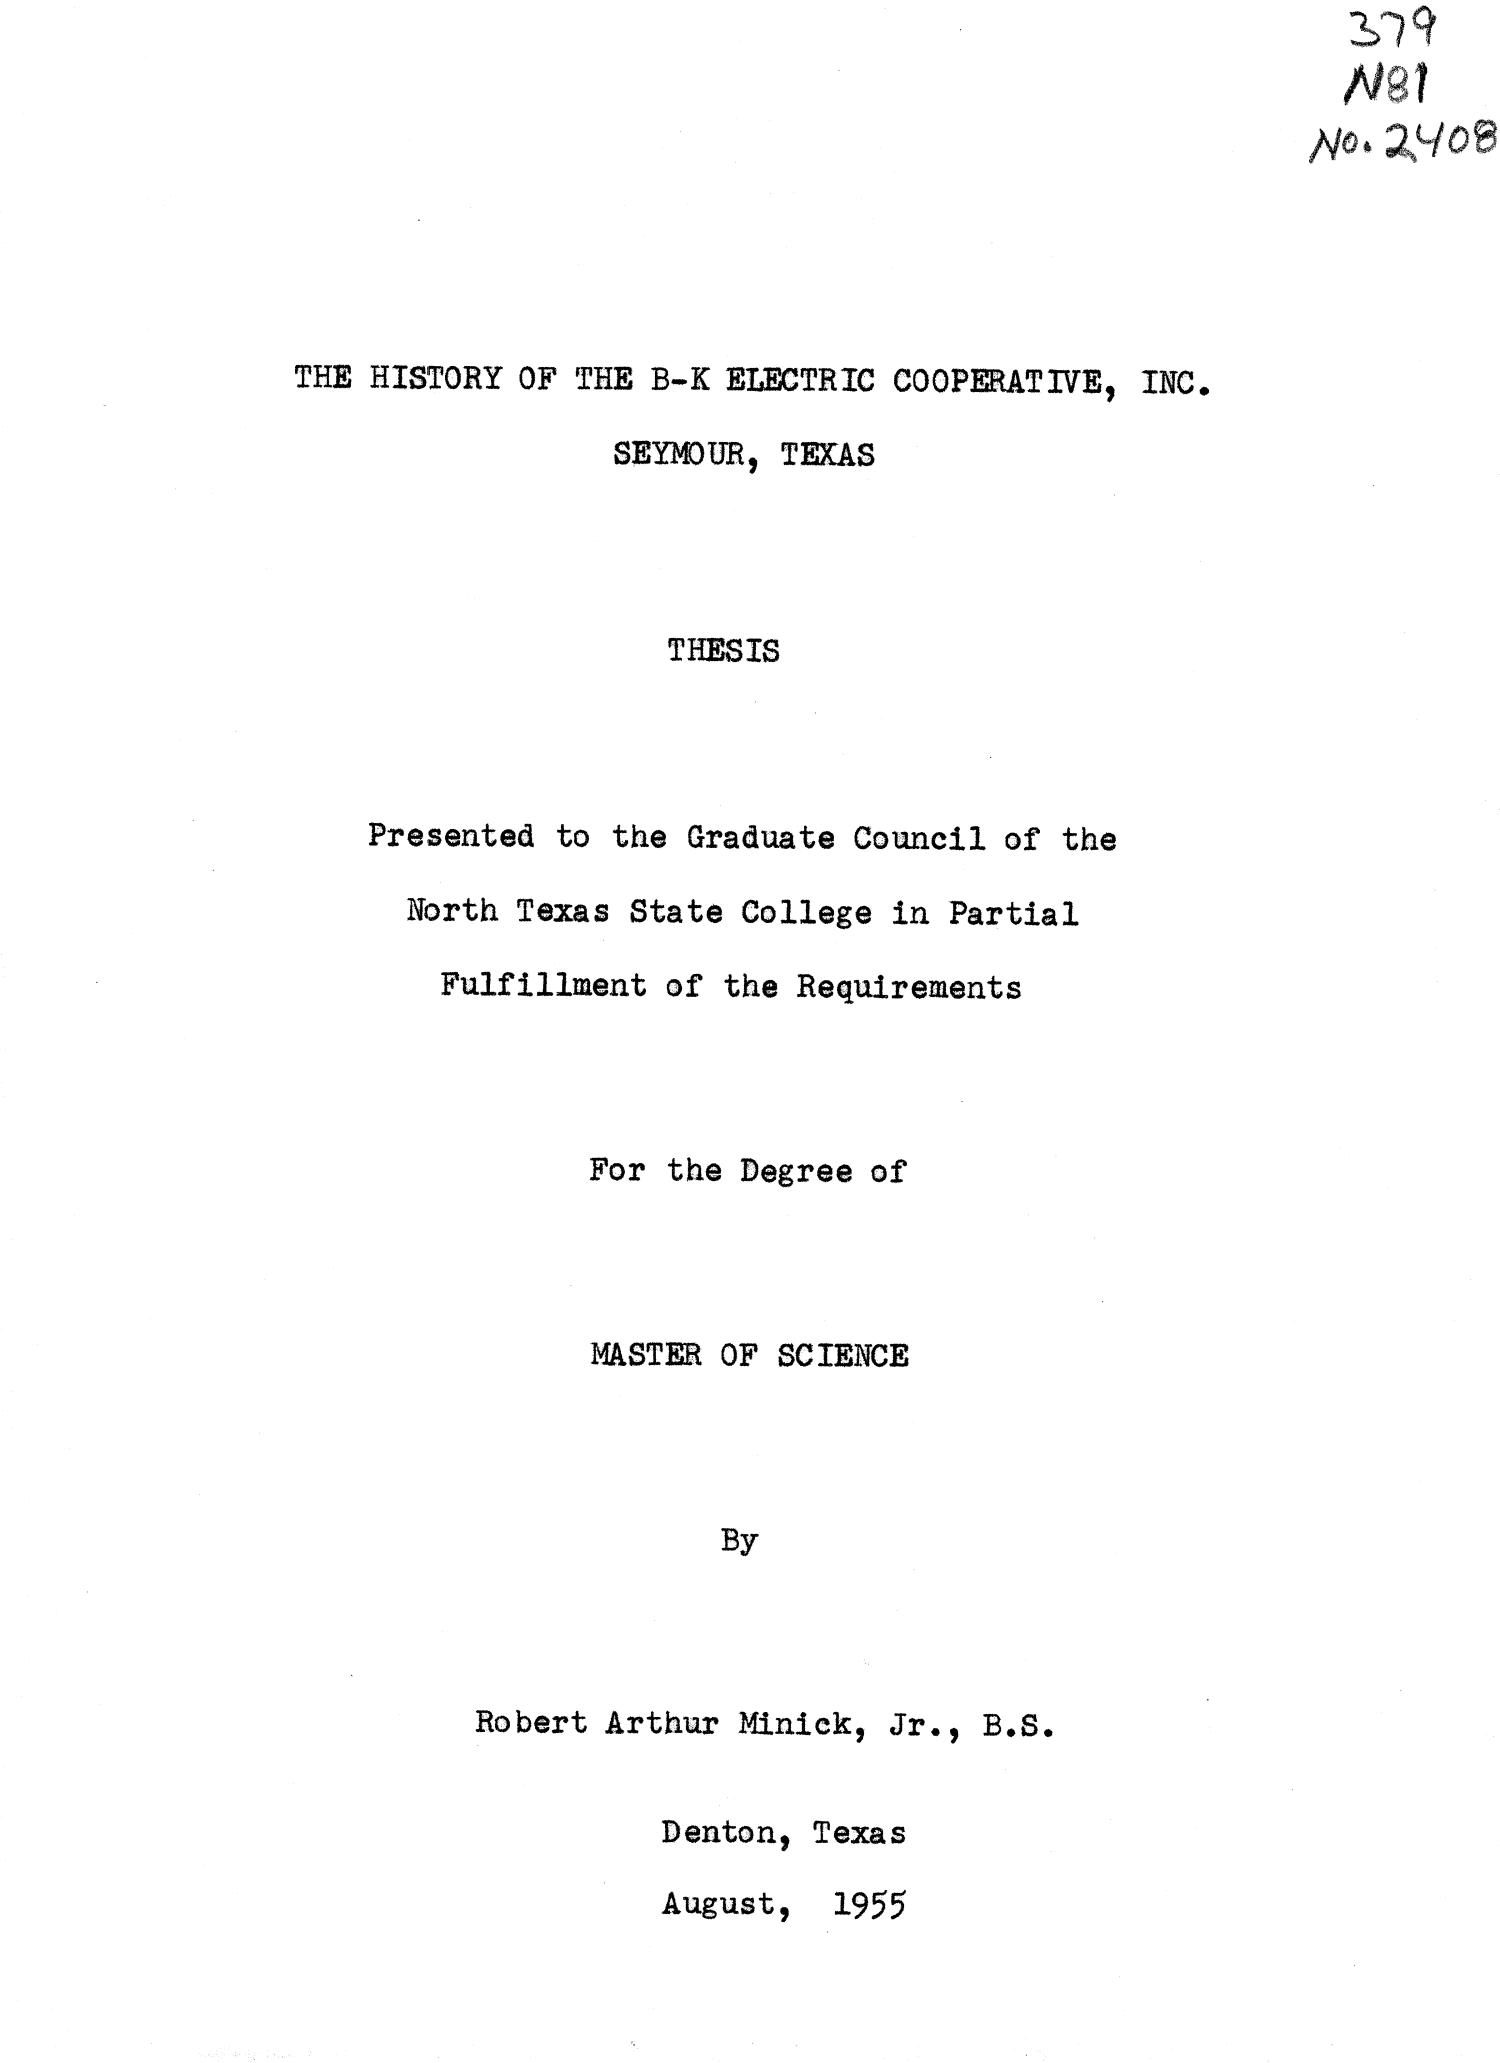 The History of the B-K Electric Cooperative, Inc. Seymour, Texas
                                                
                                                    Title Page
                                                